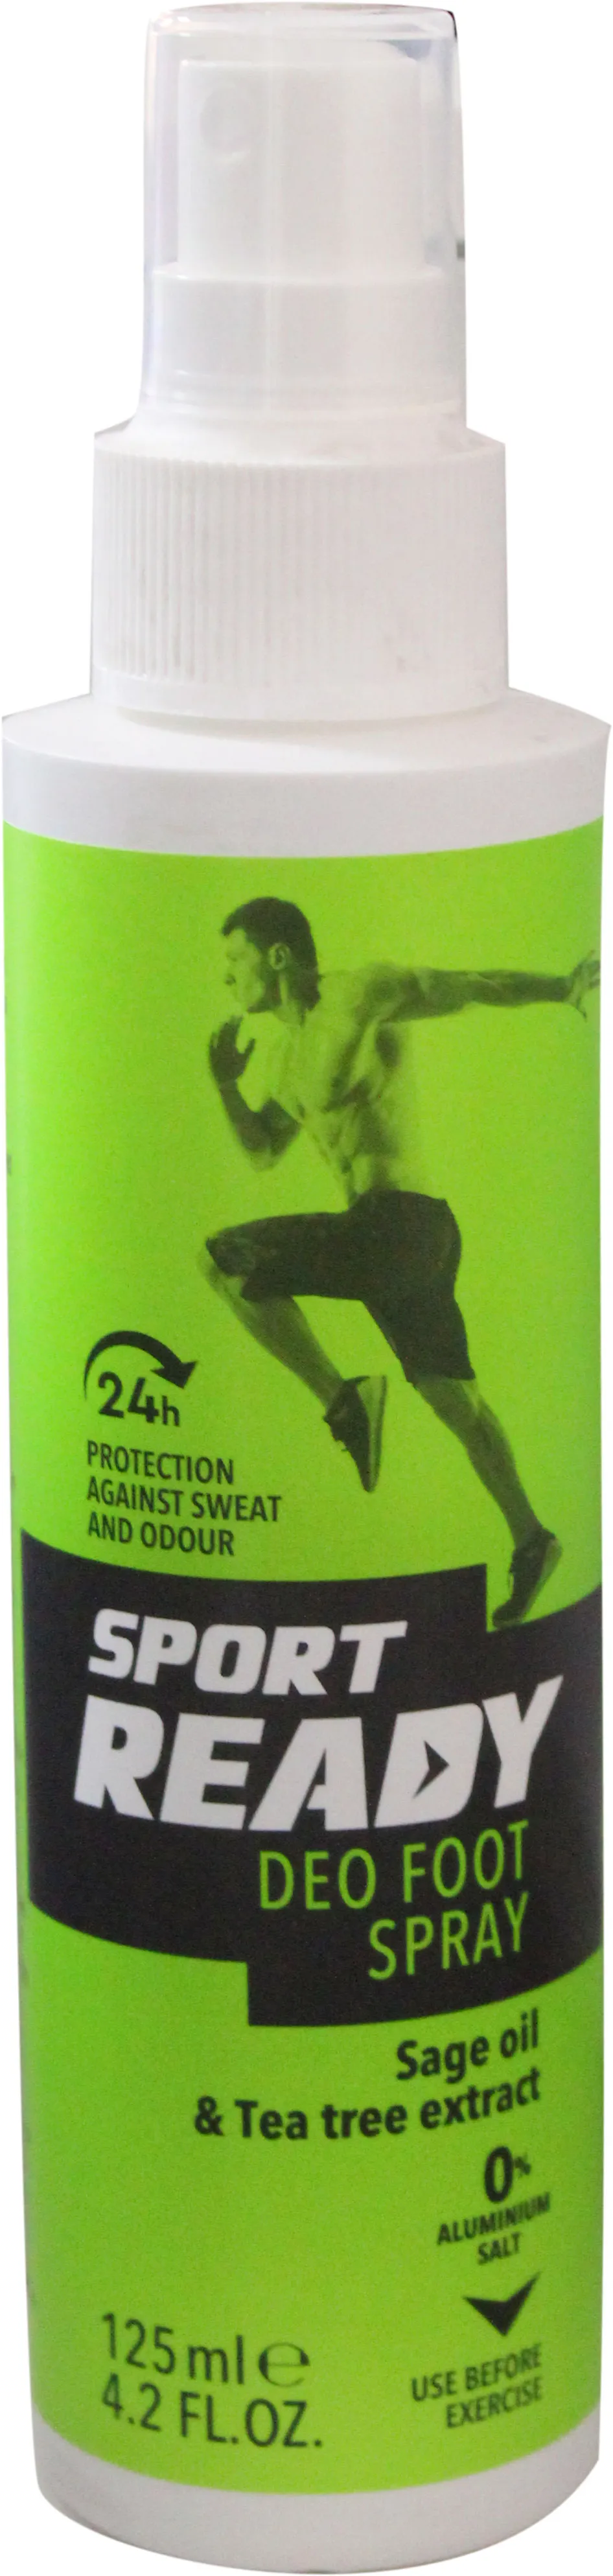 Sport Ready Foot Deodorant Spray 125ml _ Anti Odor _ Sweat Prevention for Shoe and Feet